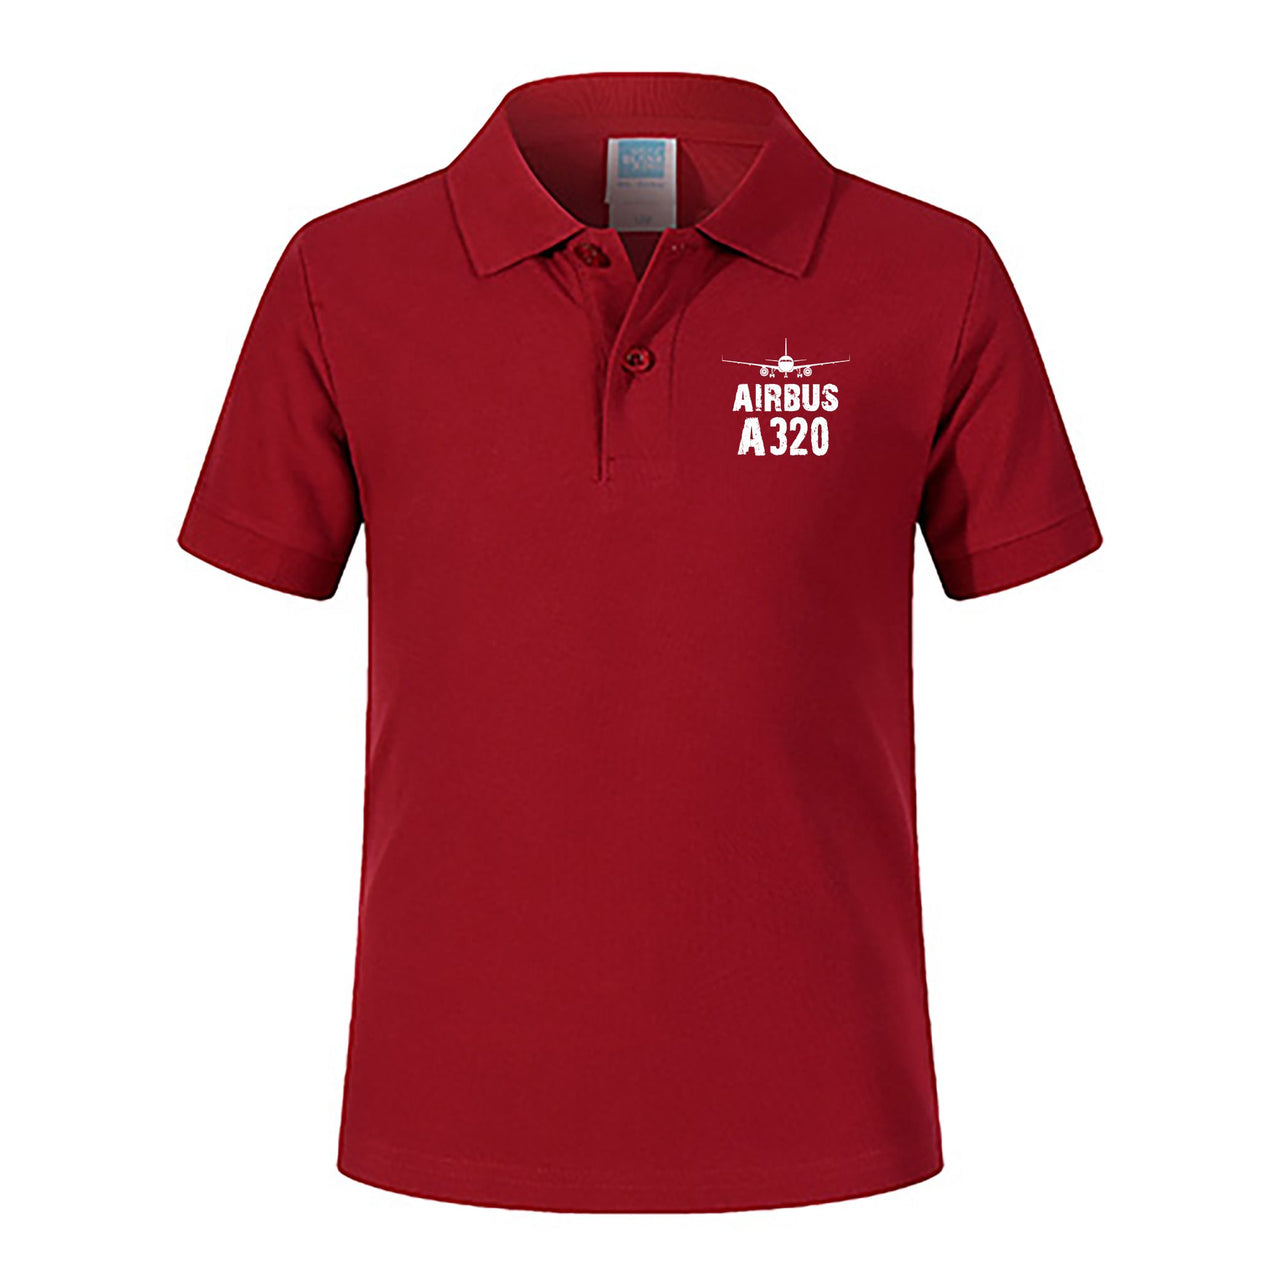 Airbus A320 & Plane Designed Children Polo T-Shirts